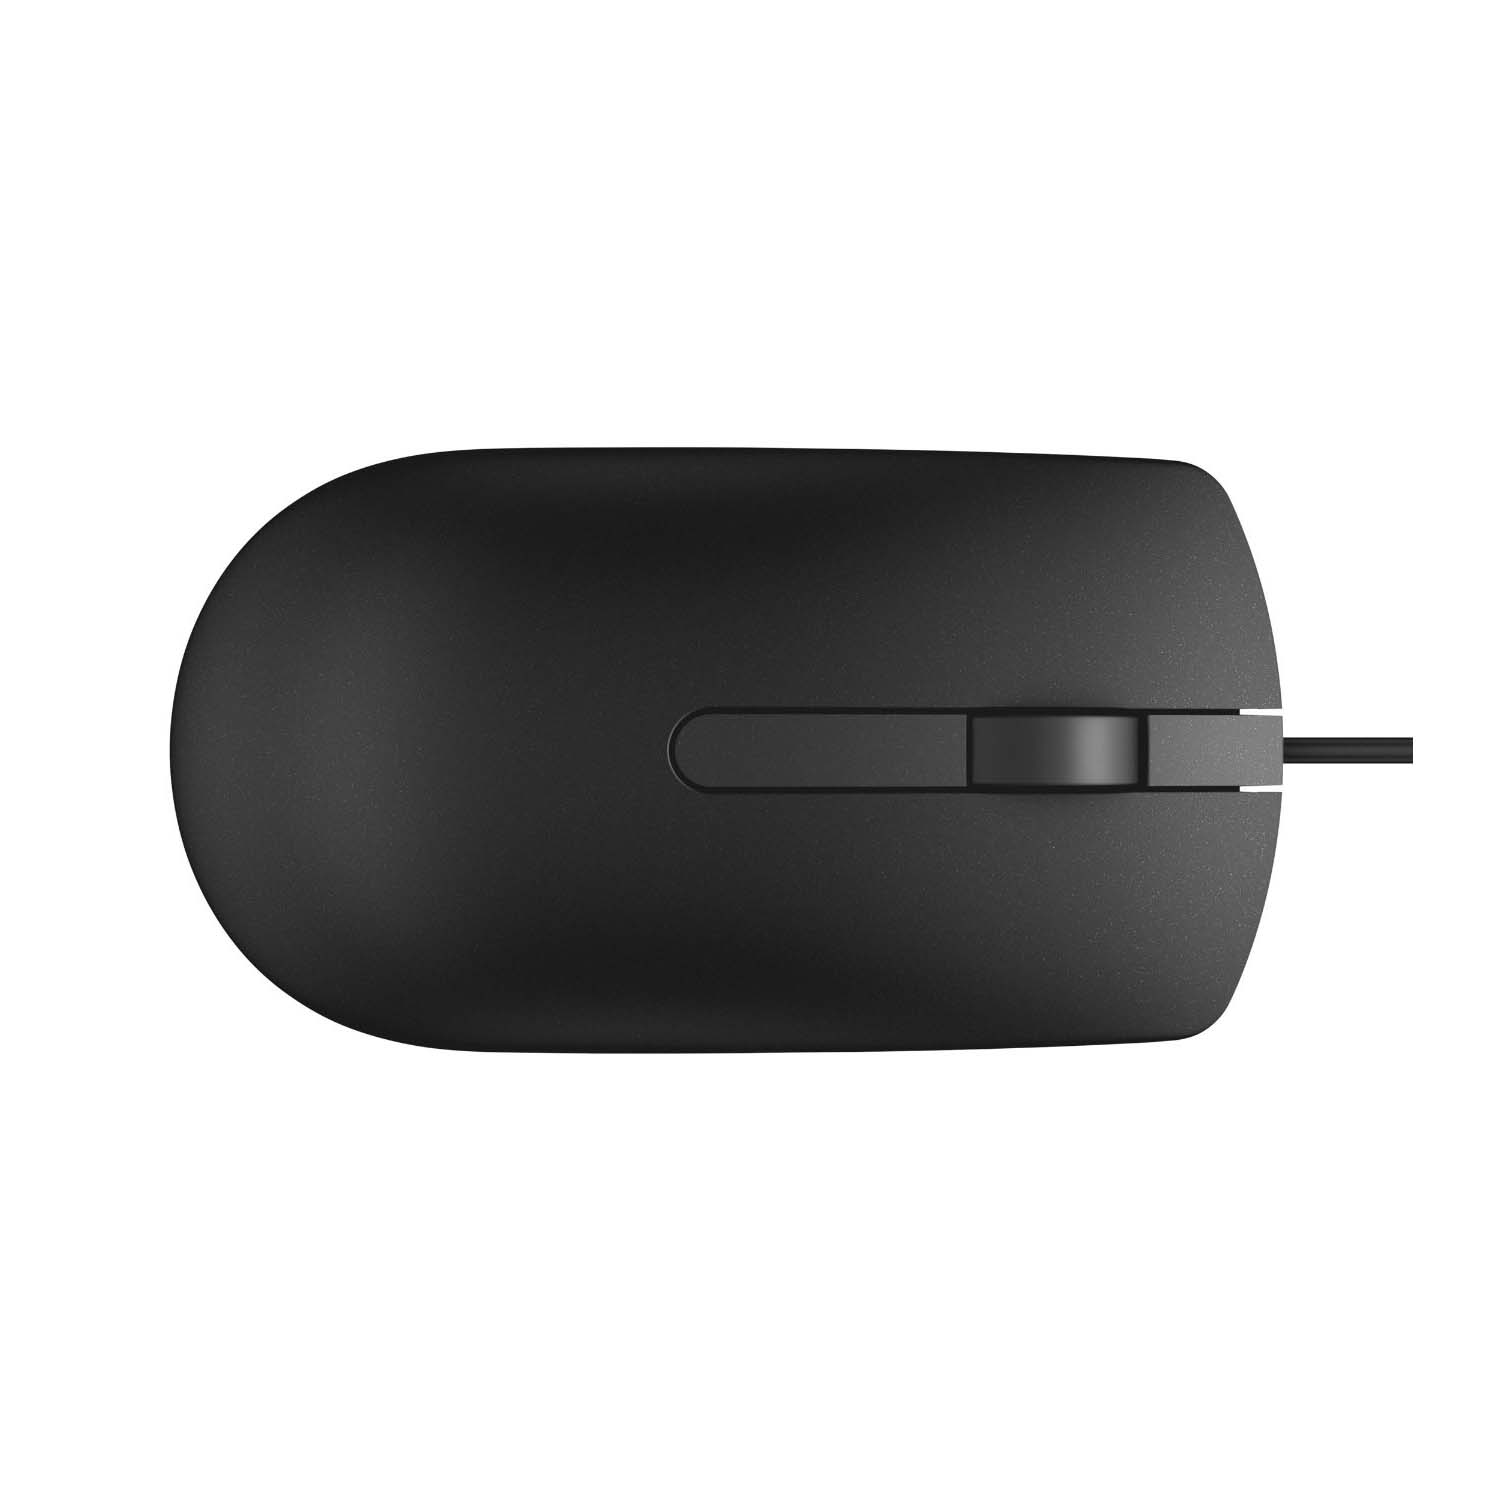 Dell USB Optical Mouse - MS116